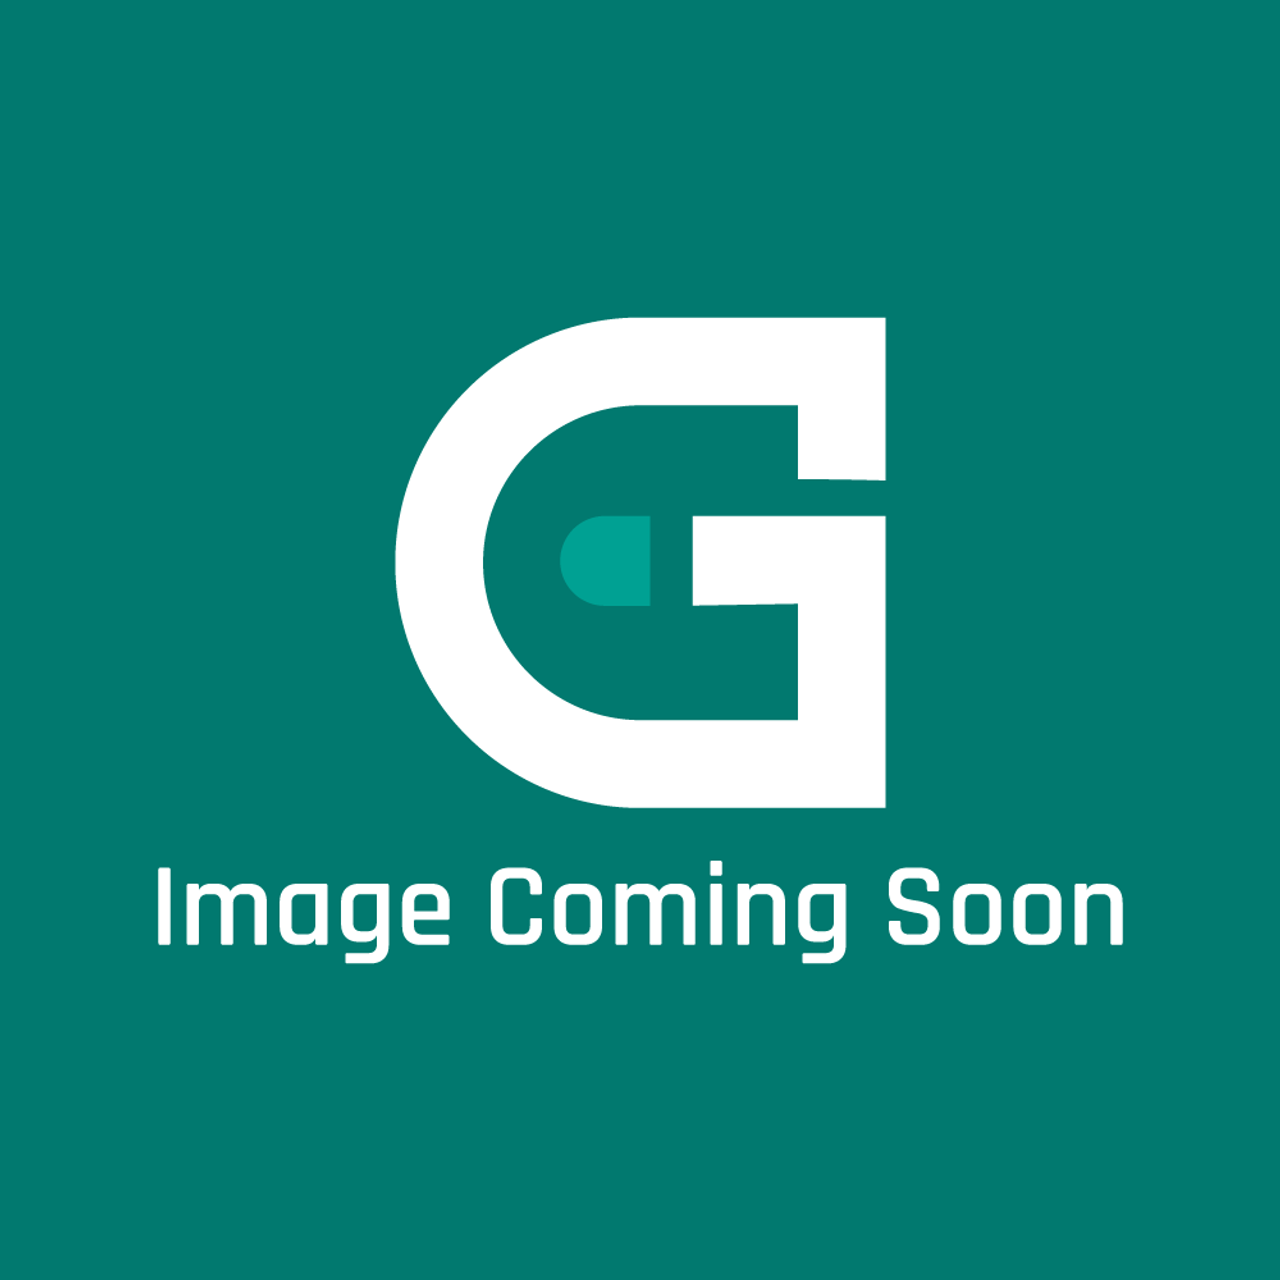 Frigidaire - Electrolux 134258400 - STACKING KIT - Image Coming Soon!